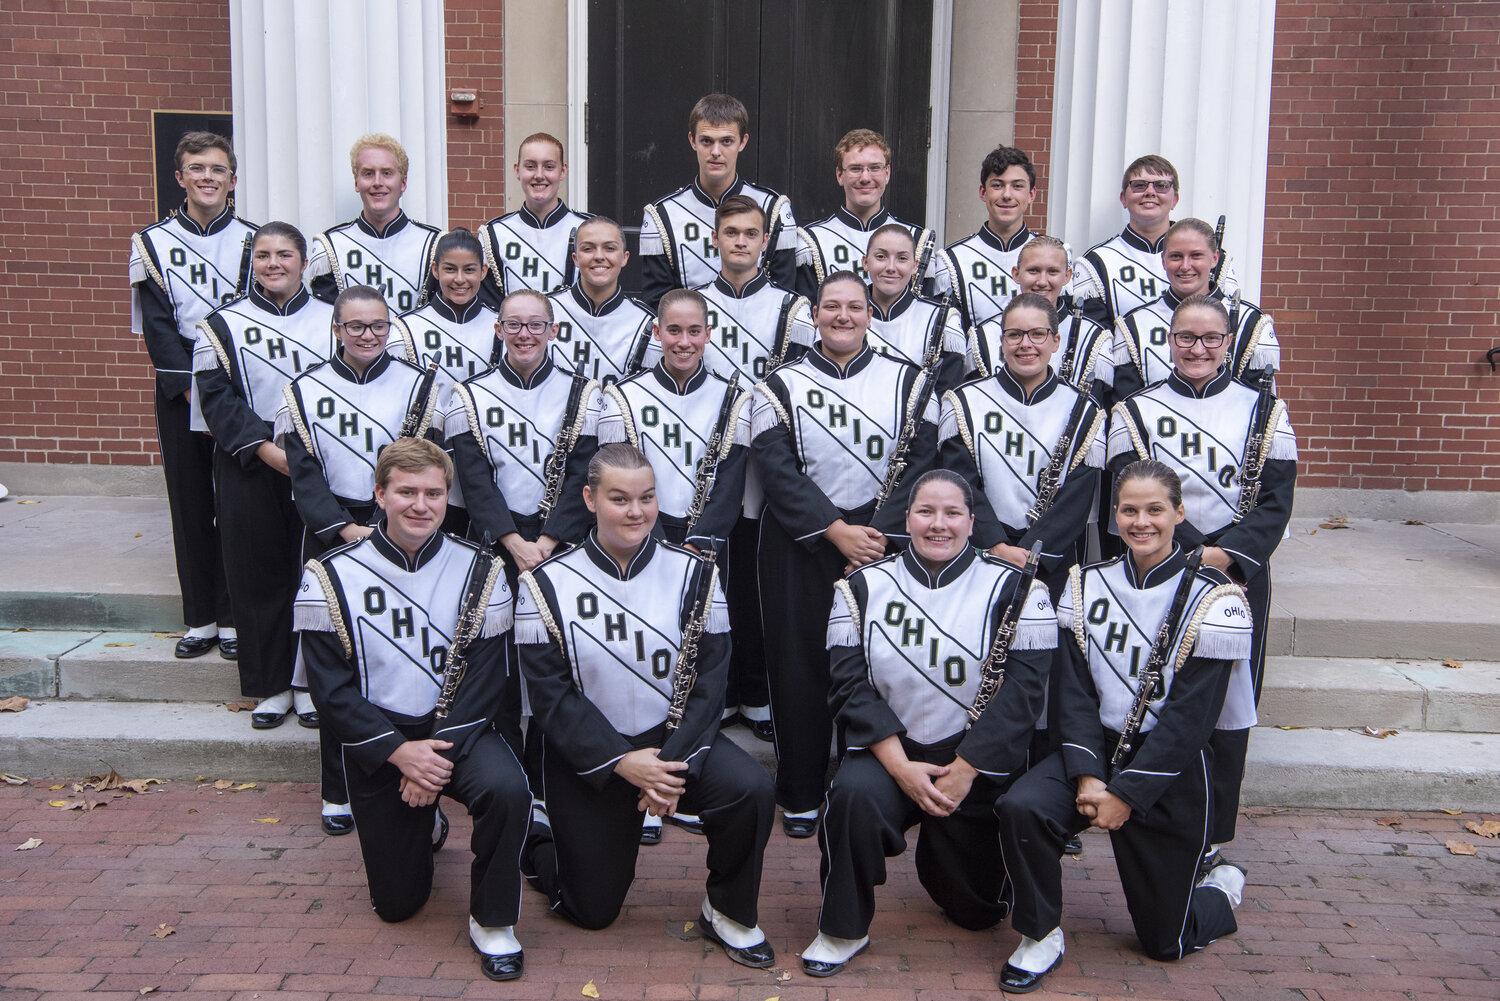 Marching 110 clarinet players